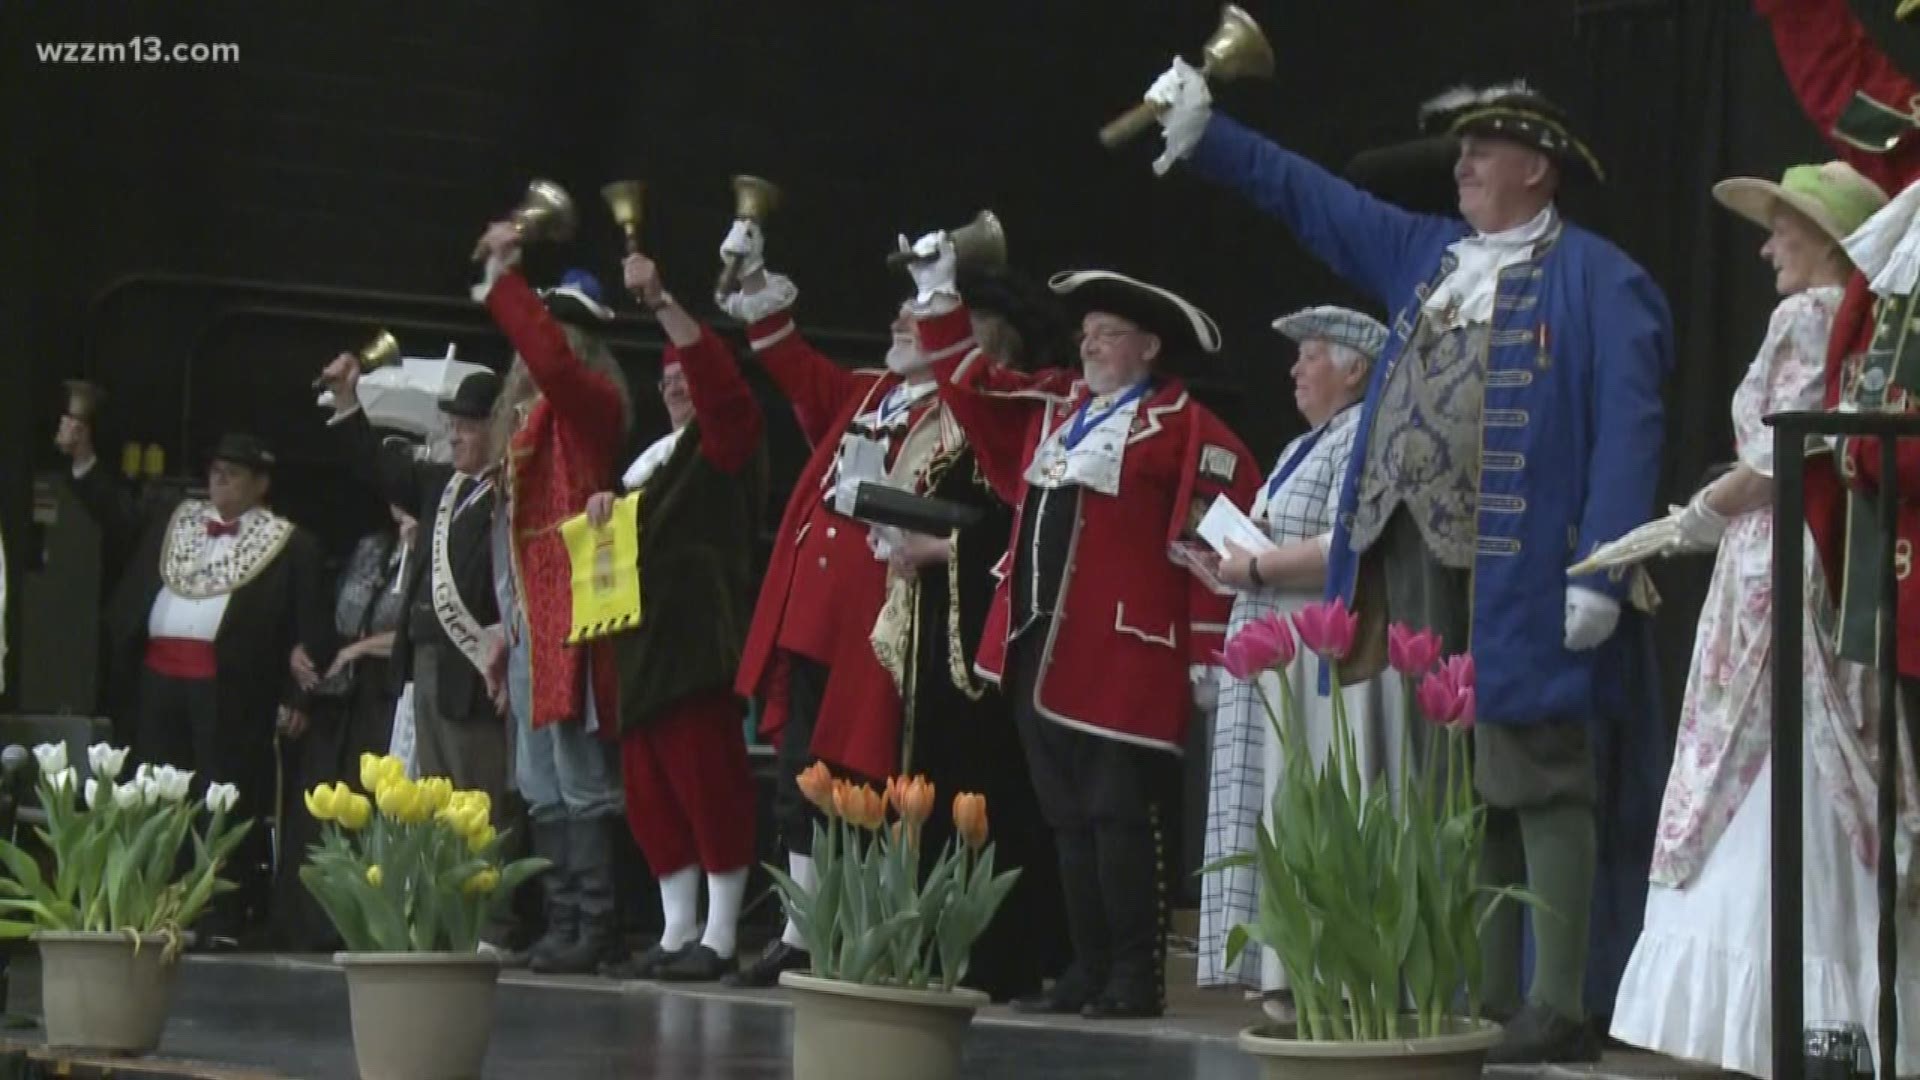 Town crier event in Holland for Tulip Time